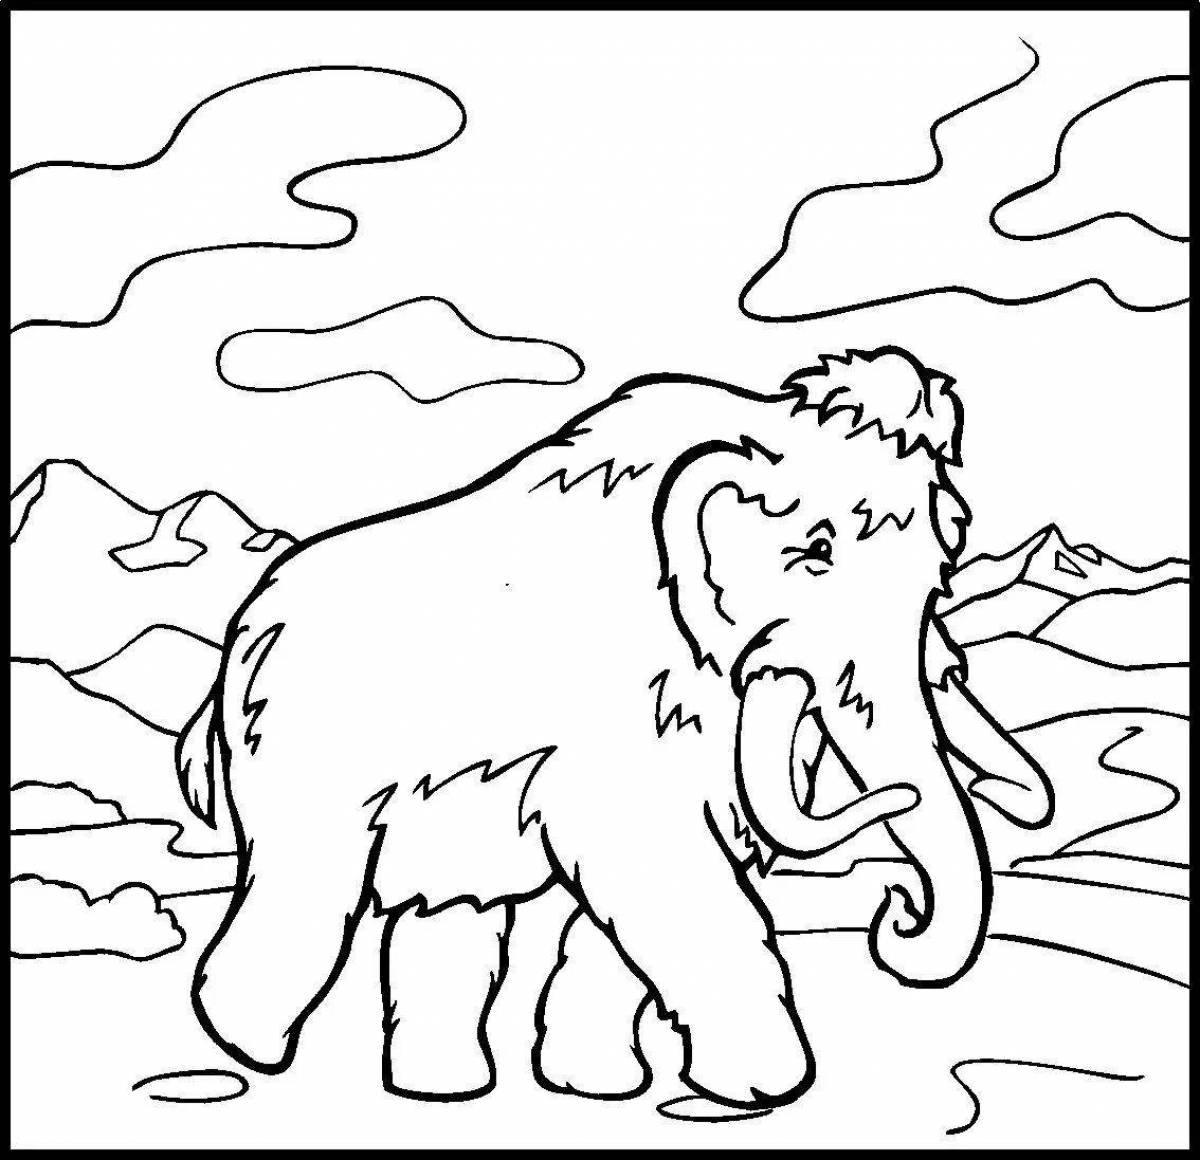 Coloring pages ancient animals